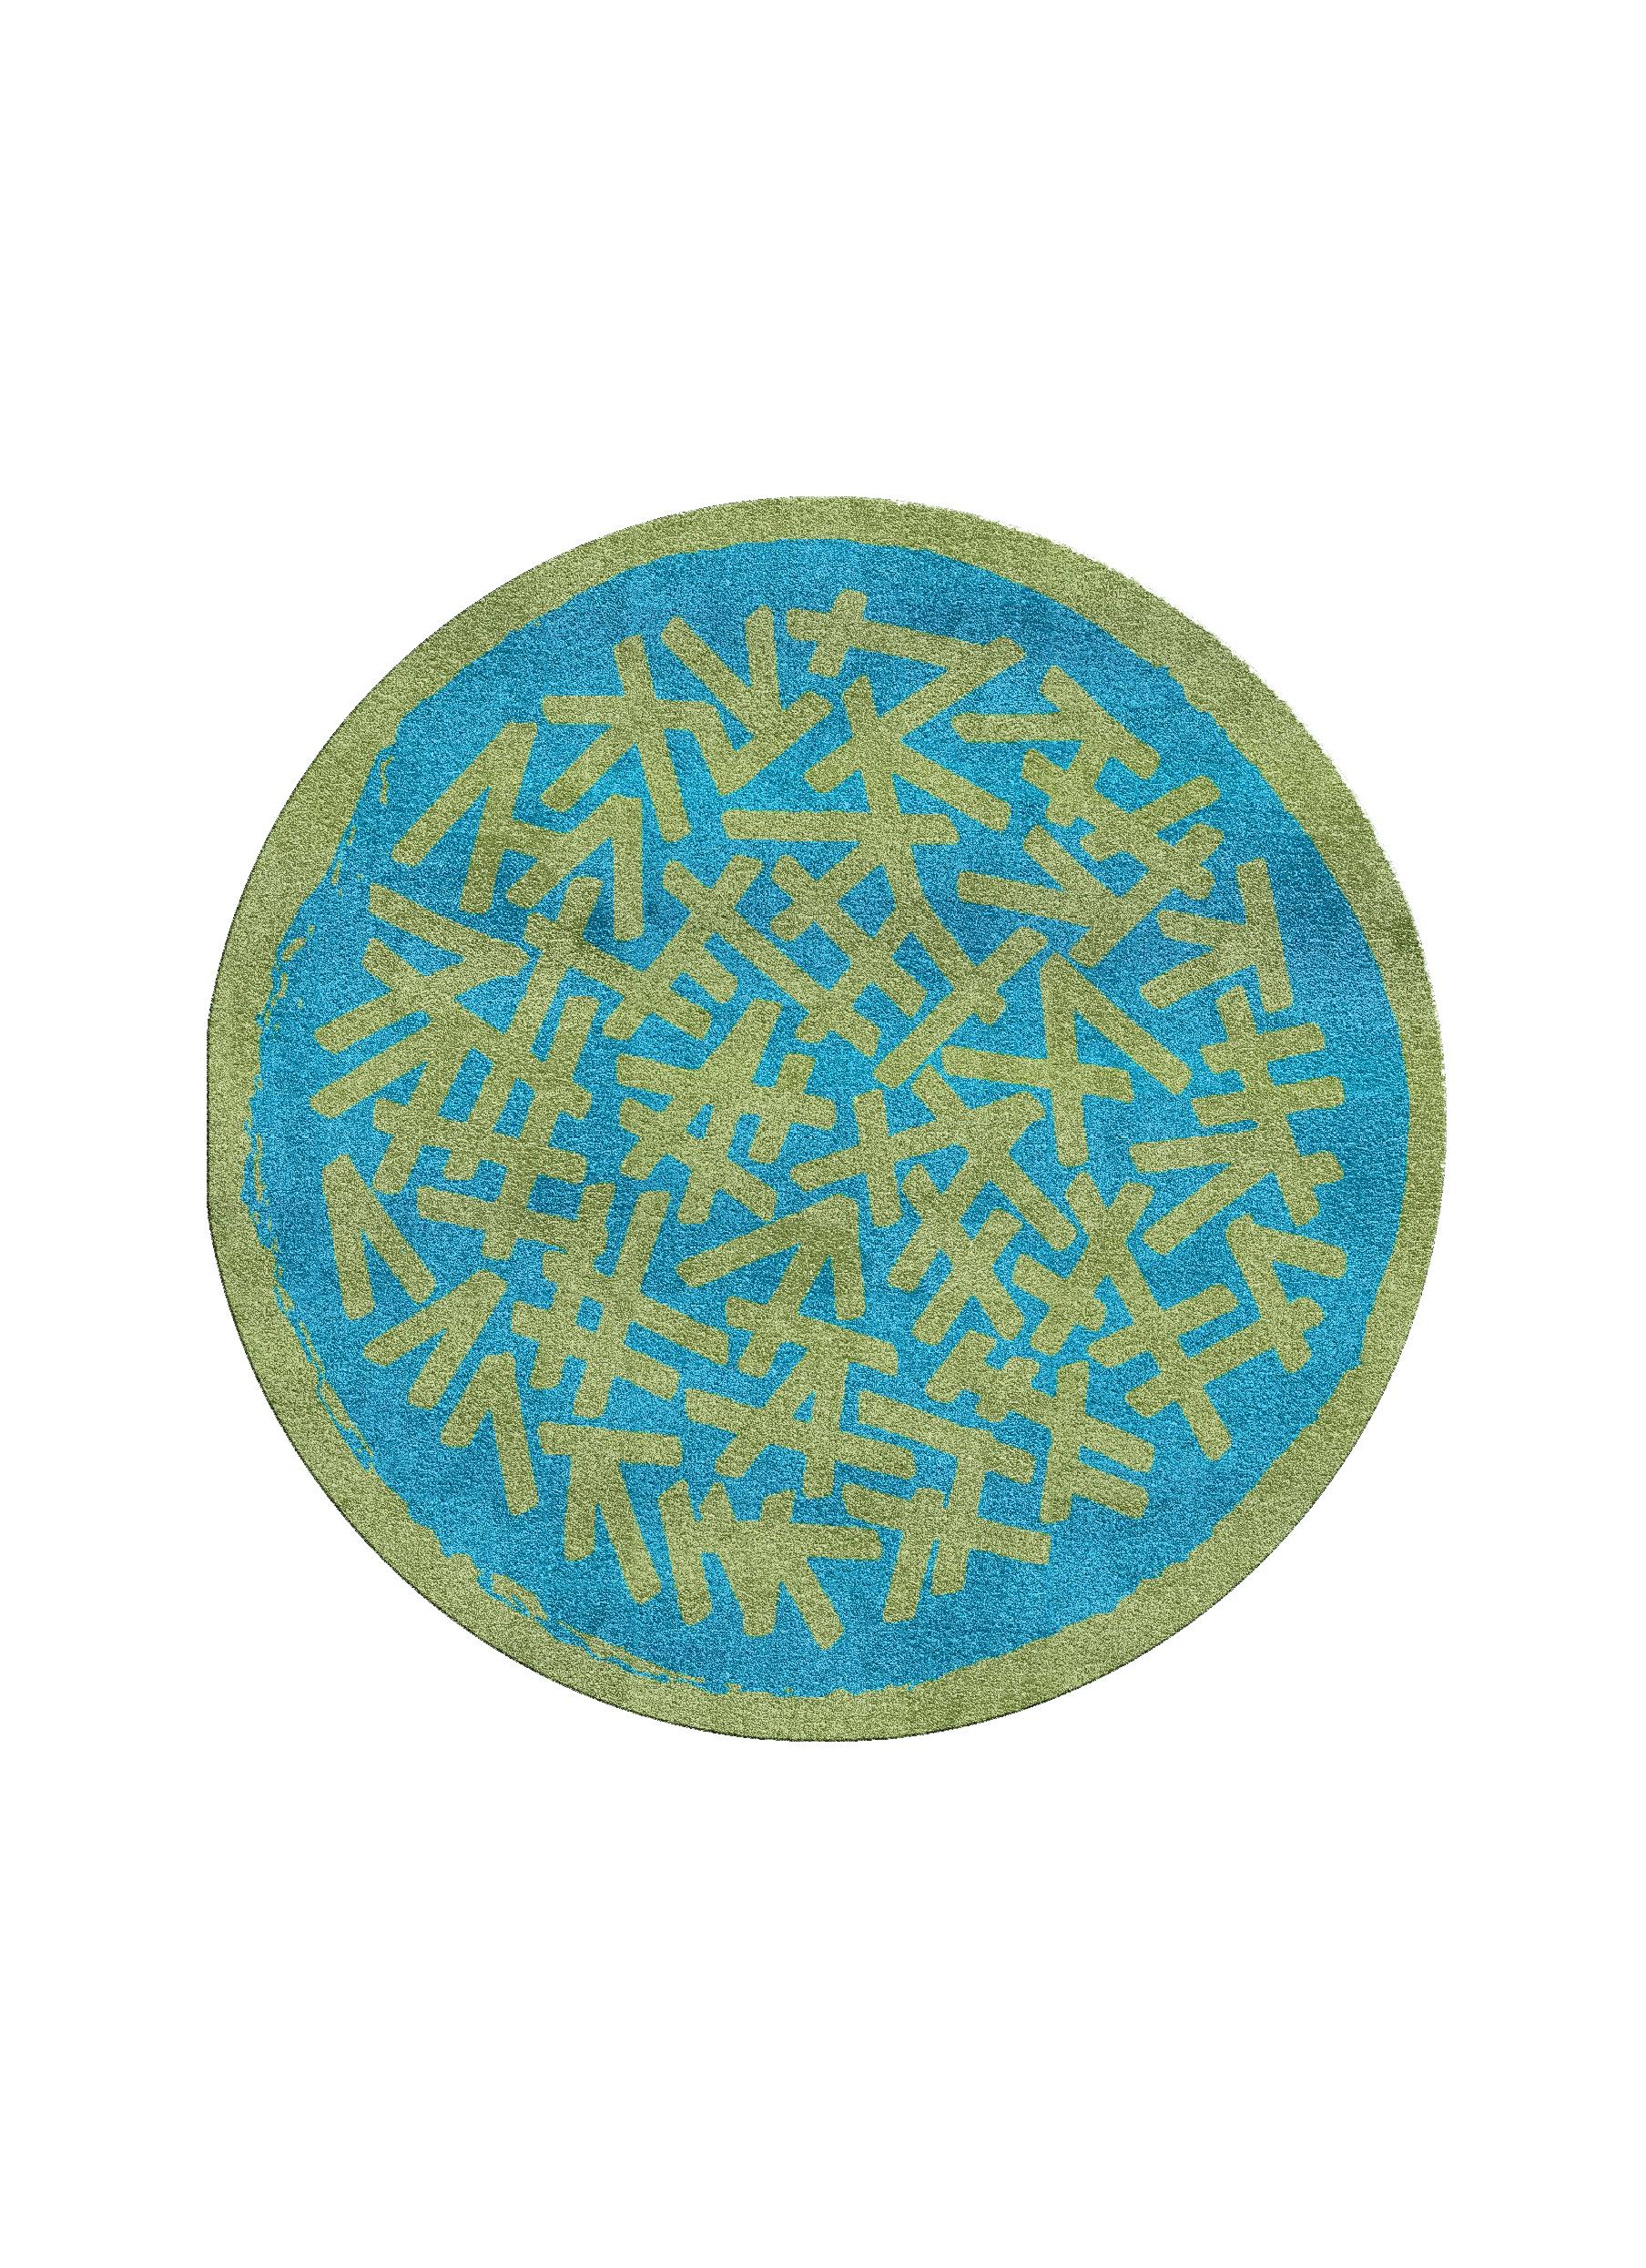 Circular rug III by Raul
Dimensions: D 200 cm
Materials: viscose, linen
Available in other colors.

The Circular rug is part of a series called “Cosmic Dance” envisioning a pattern made of dance movements. Shapes and forms harmoniously blend